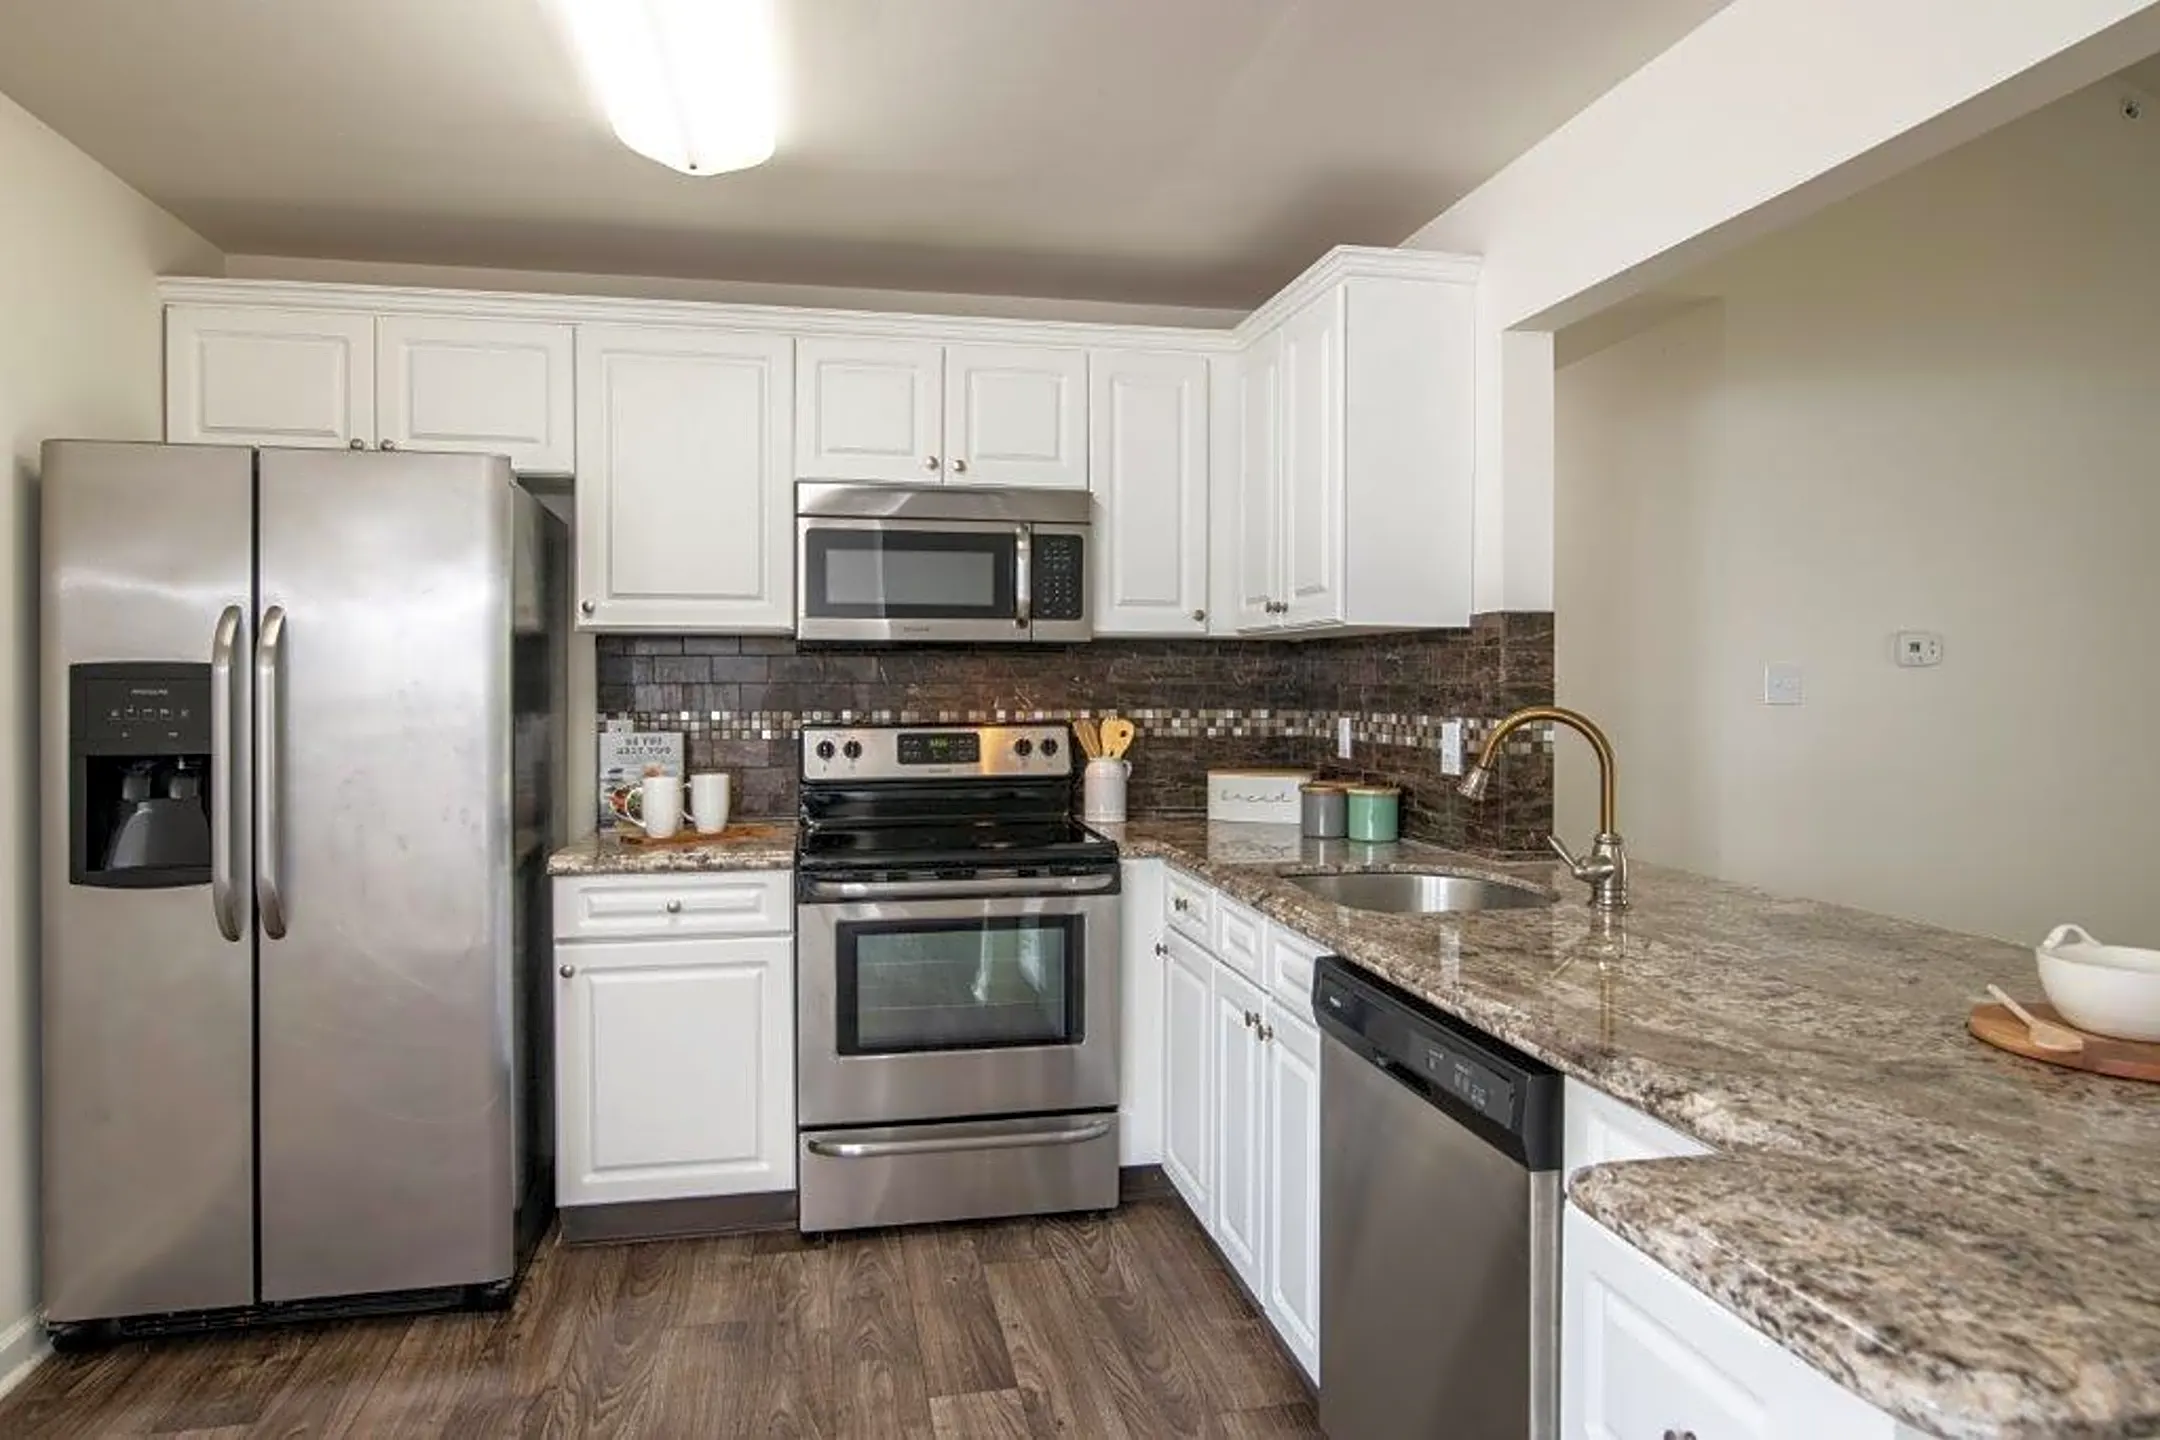 Kitchen - Abrams Run Apartment Homes - King of Prussia, PA